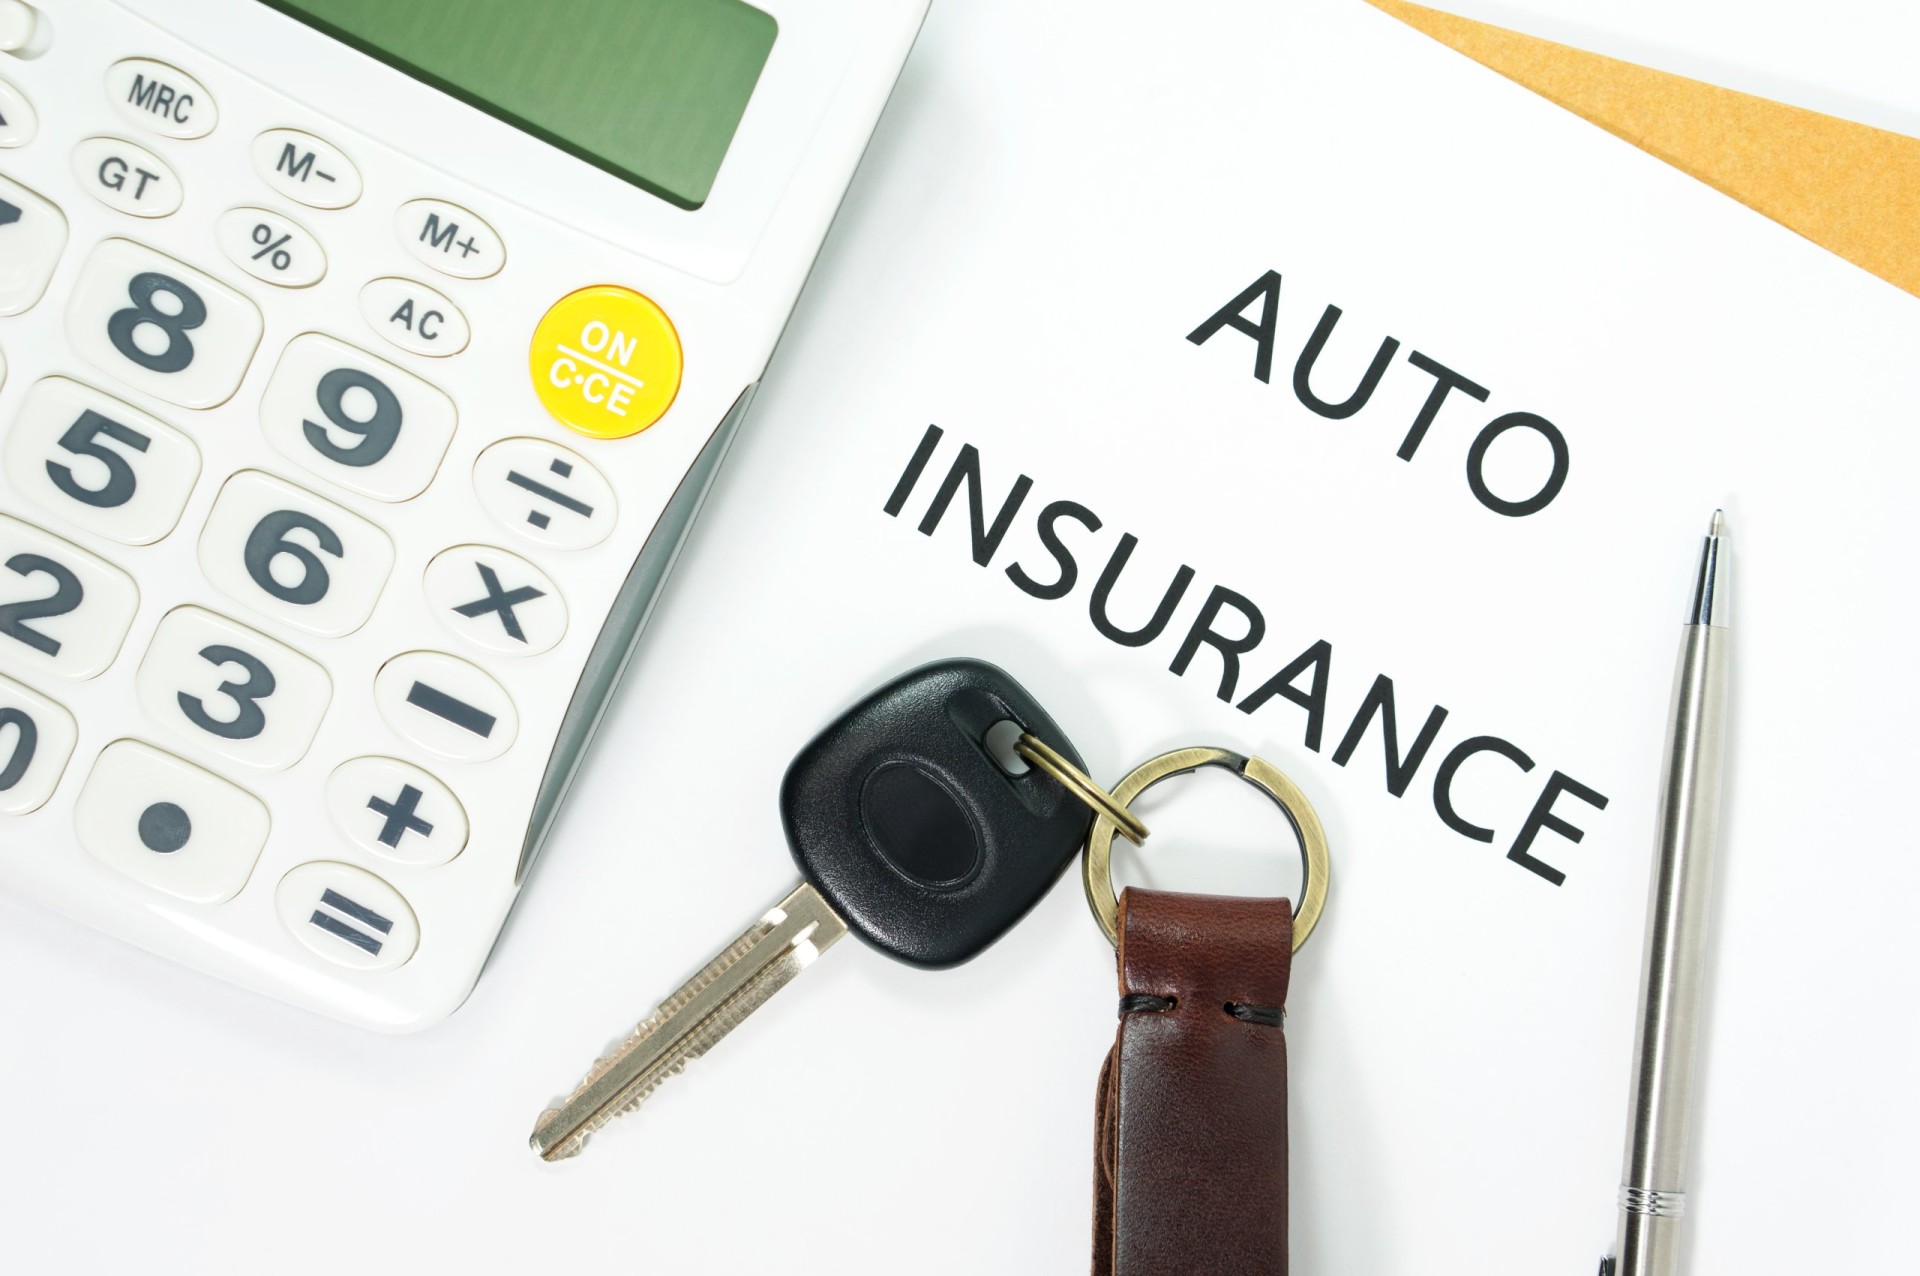 Auto insurance with car key and calculator